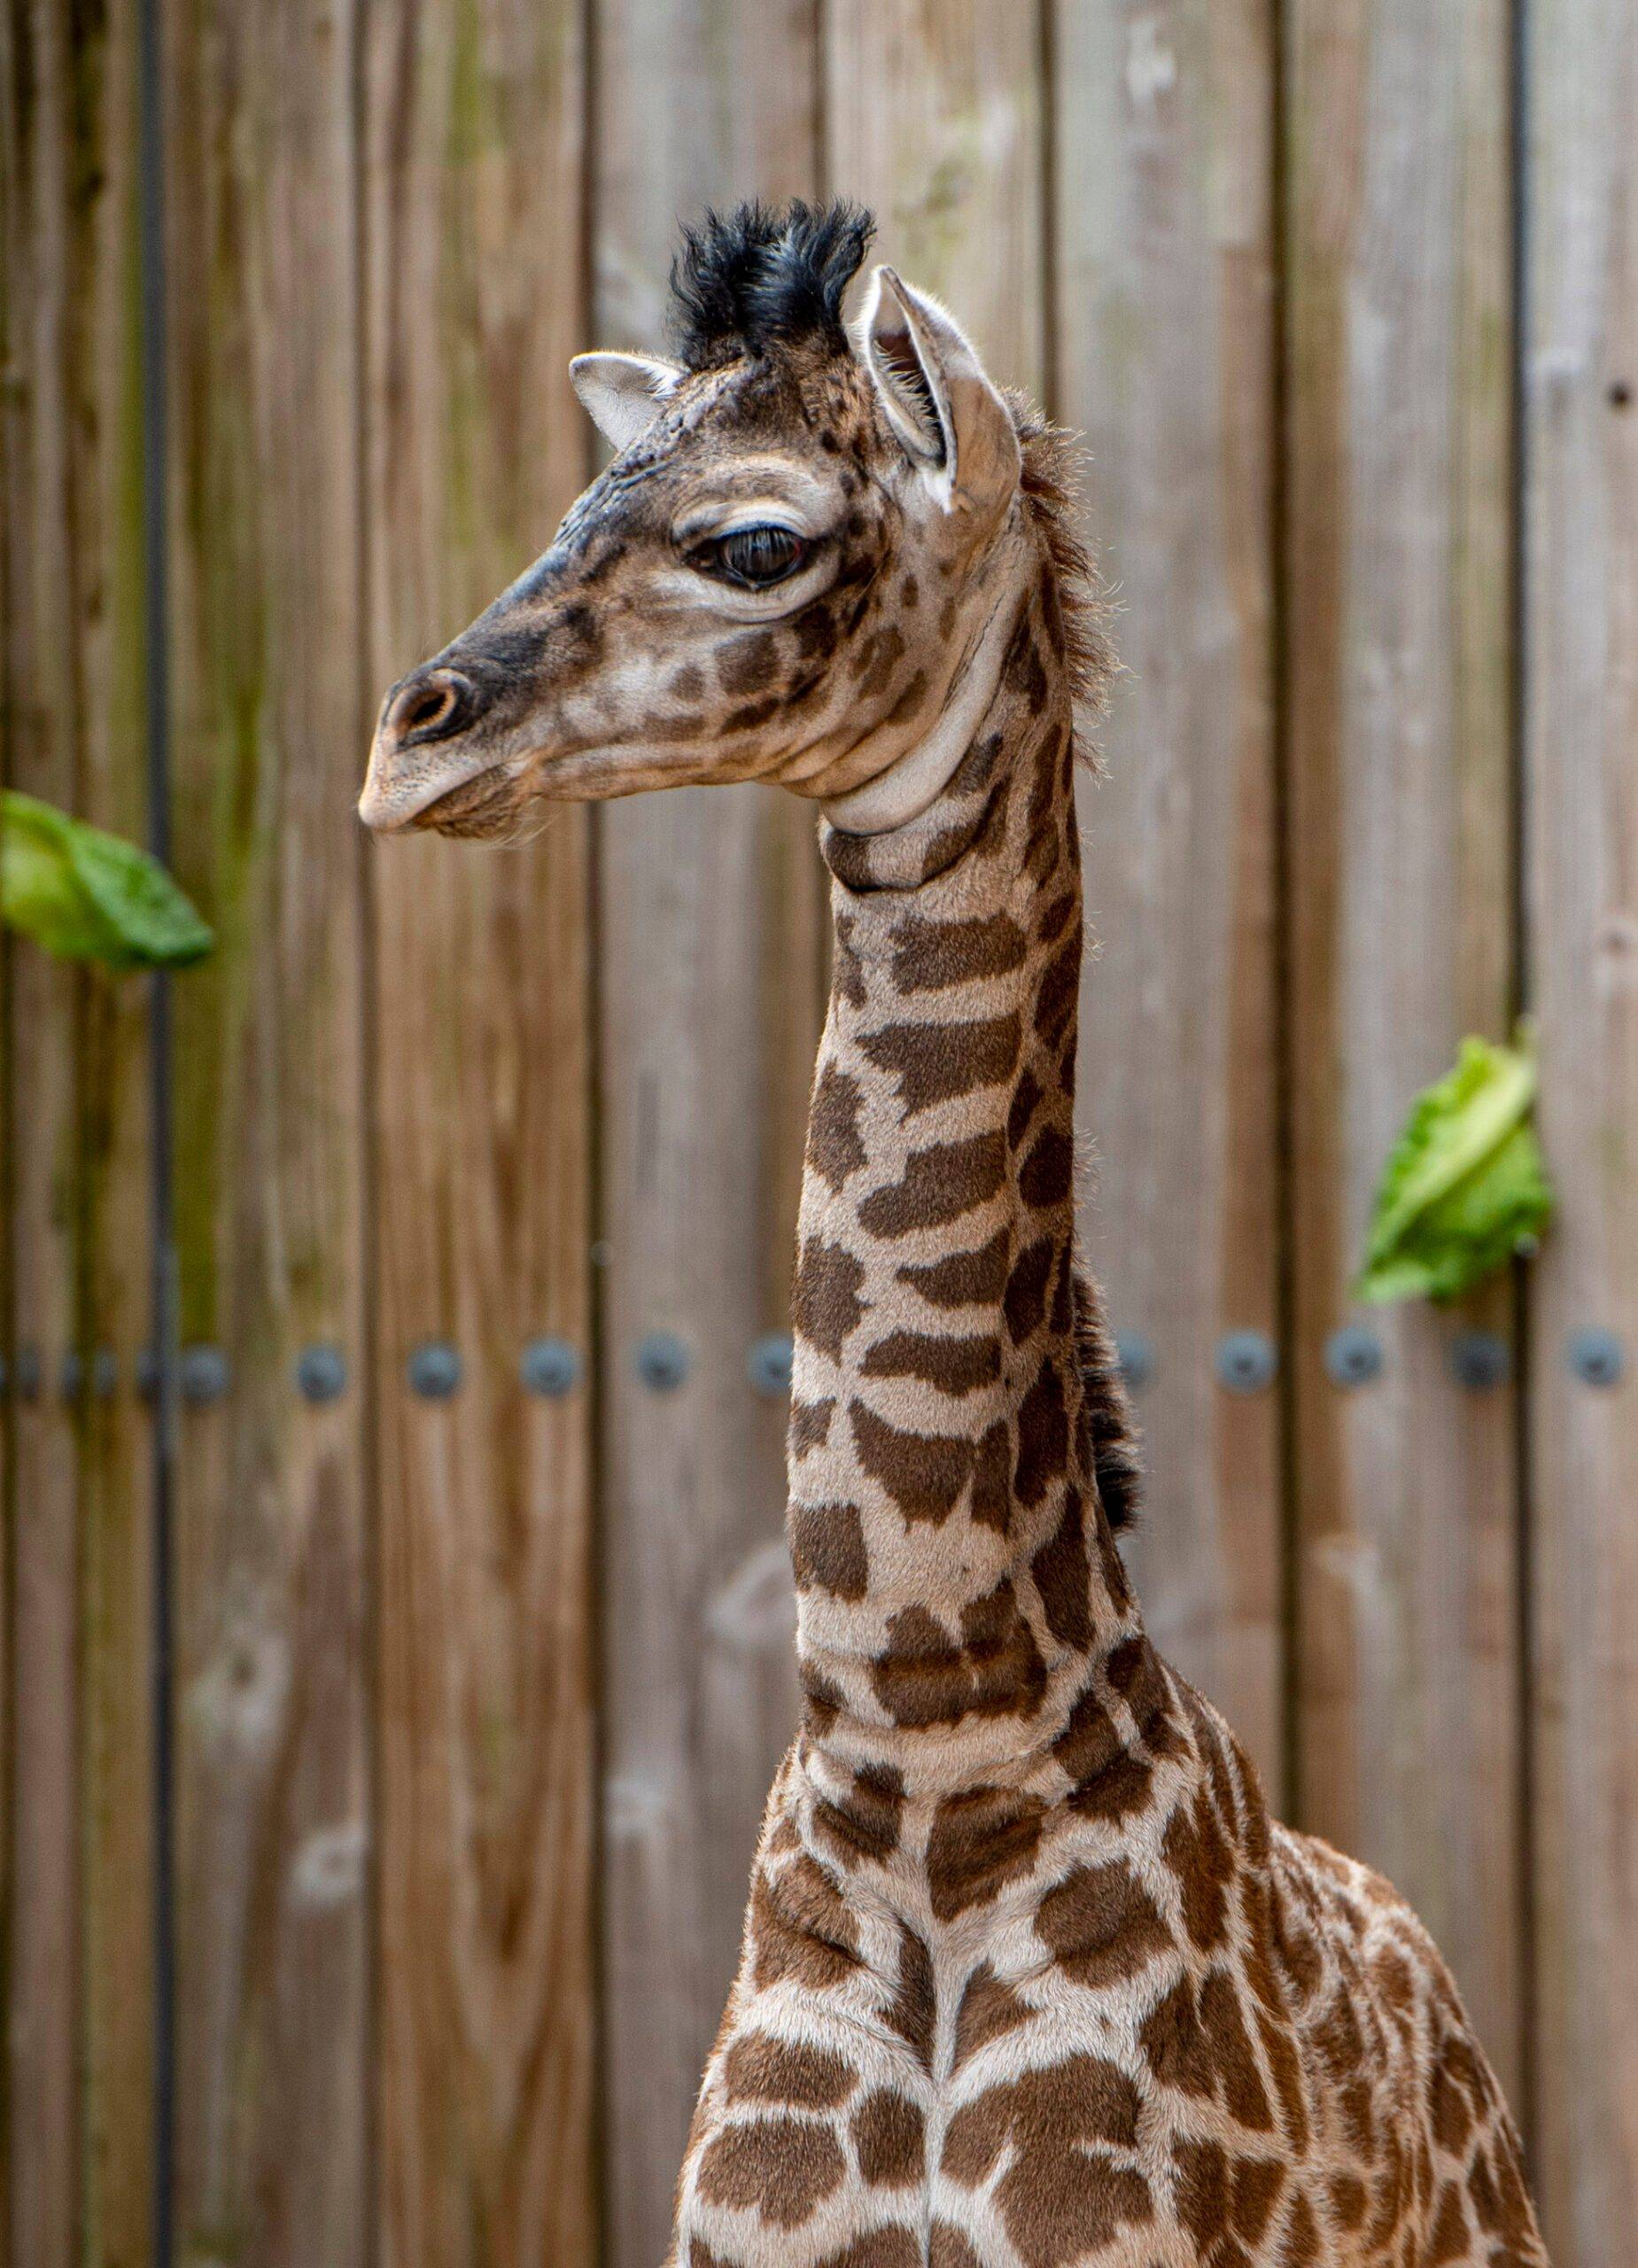 Disney's Animal Kingdom breeding program success continues with a third giraffe birth at the park in the past year